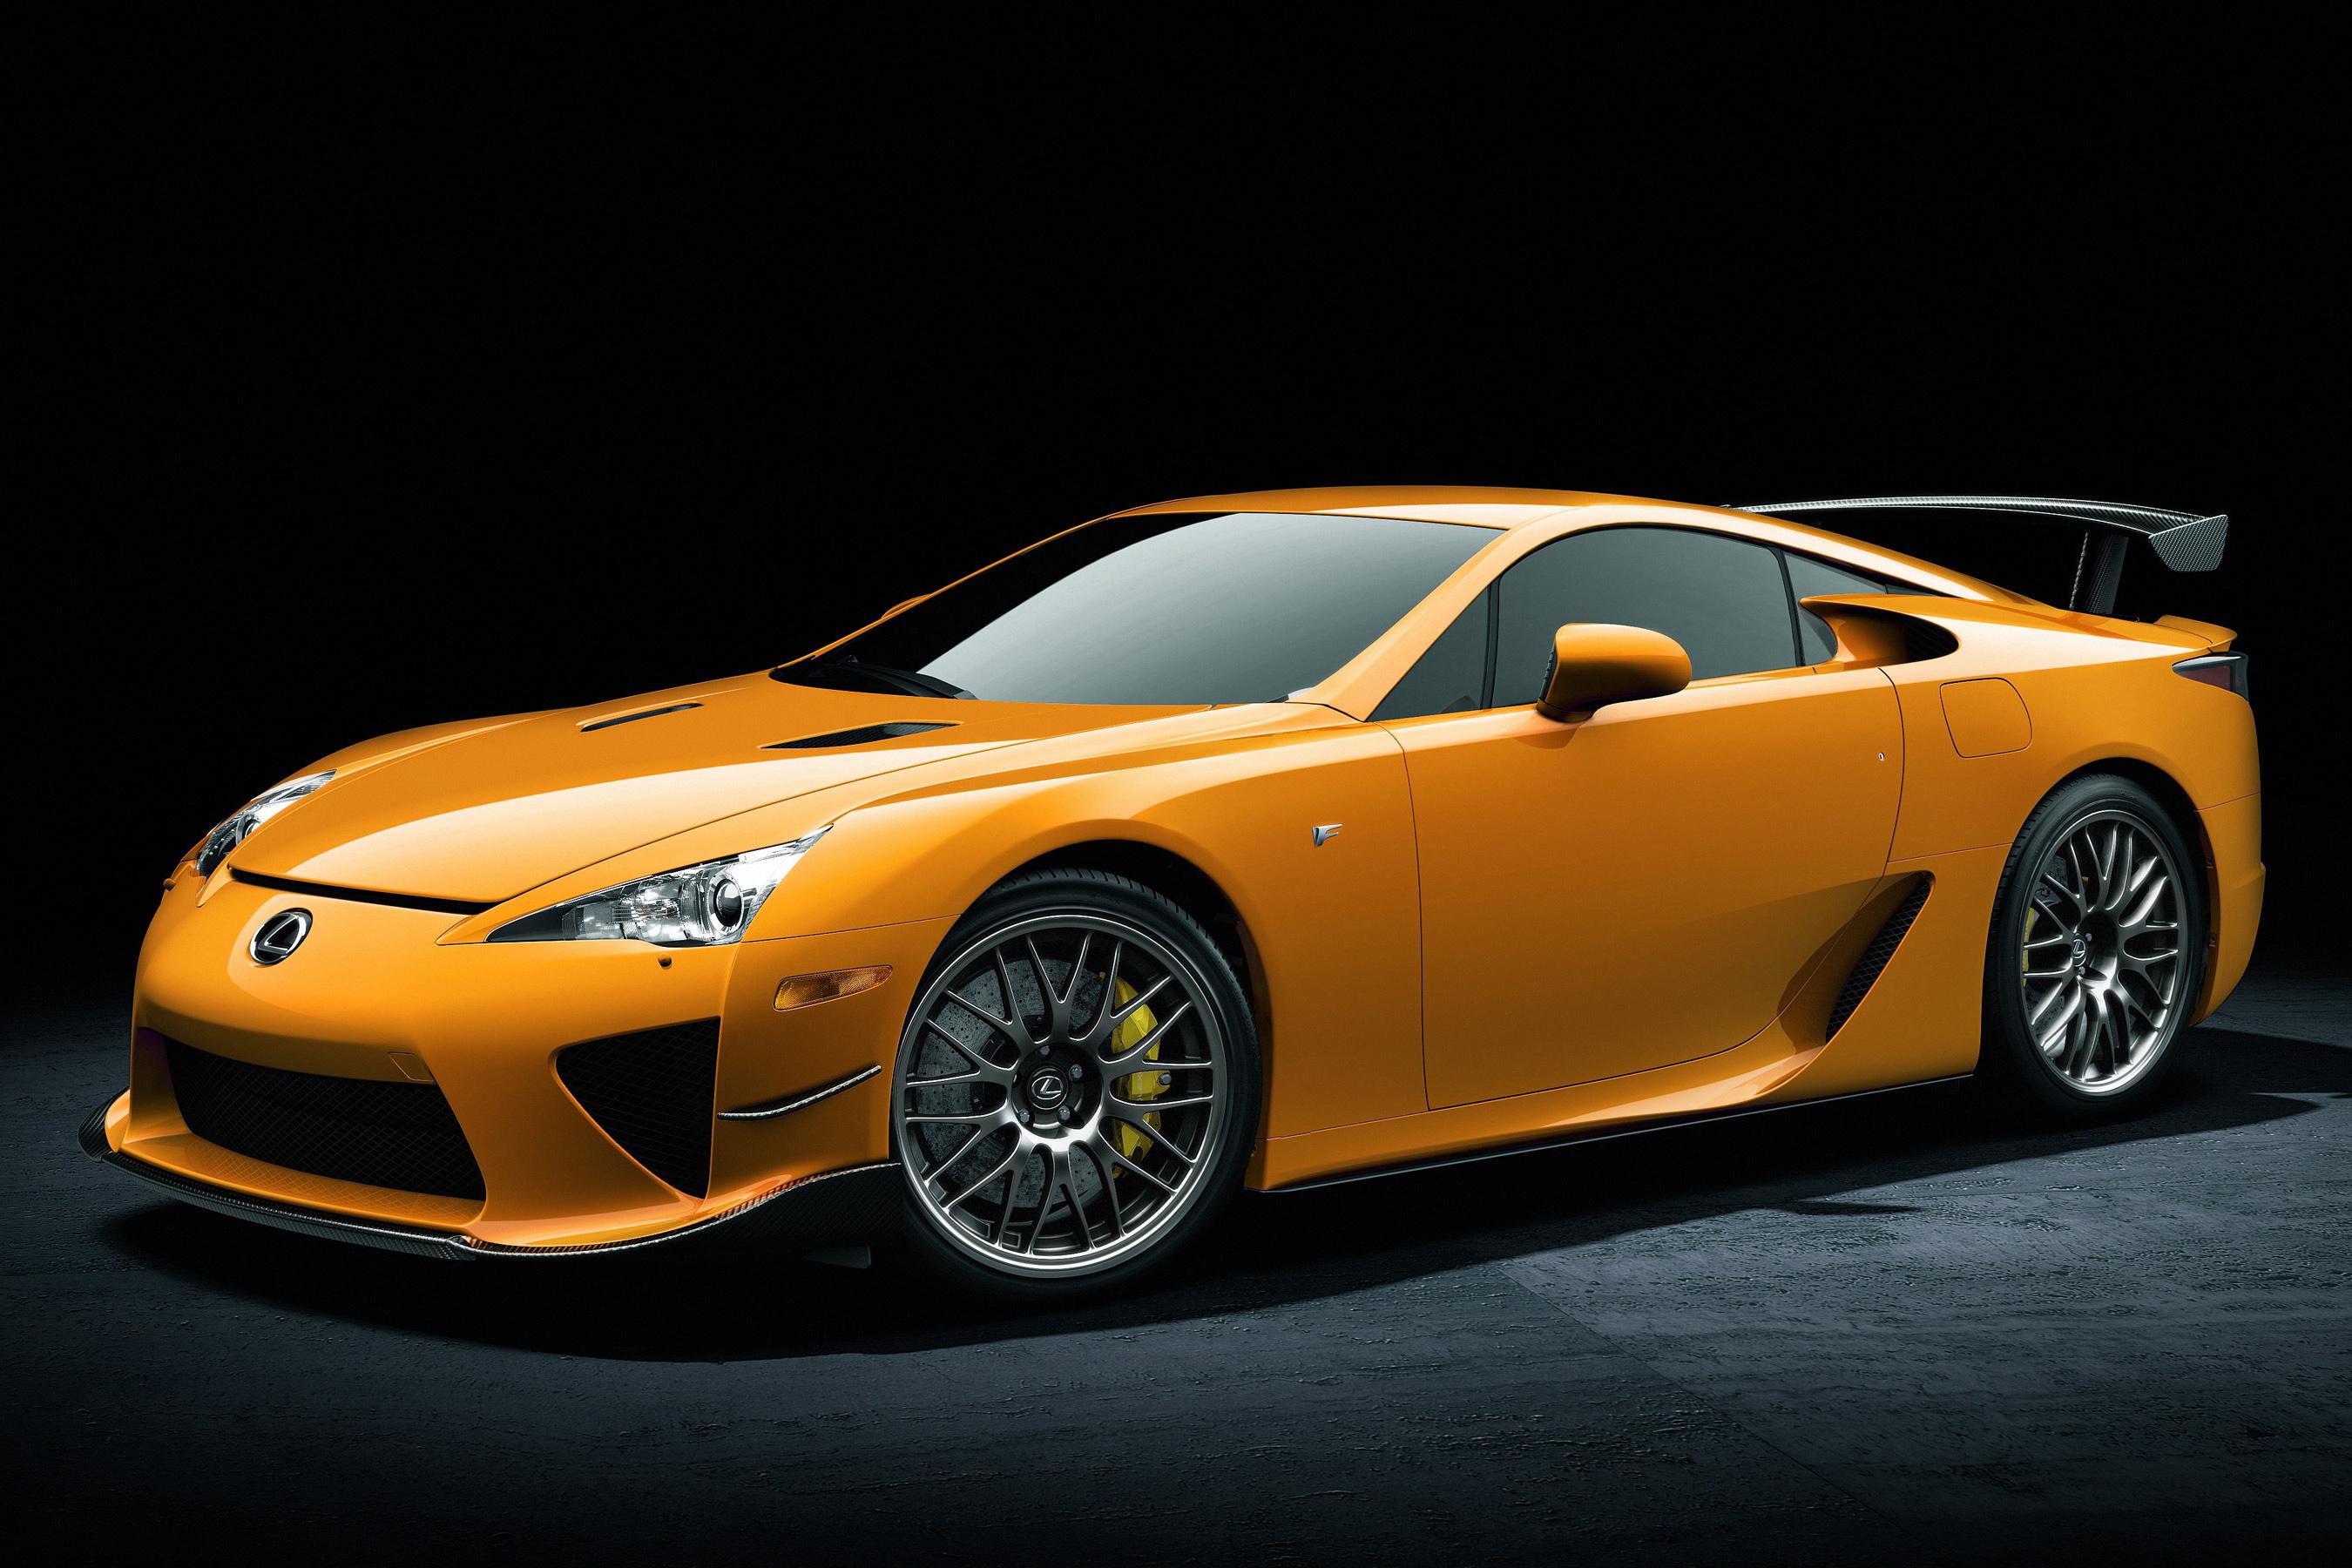 Lexus LFA supercar revival coming with V8 hybrid - report